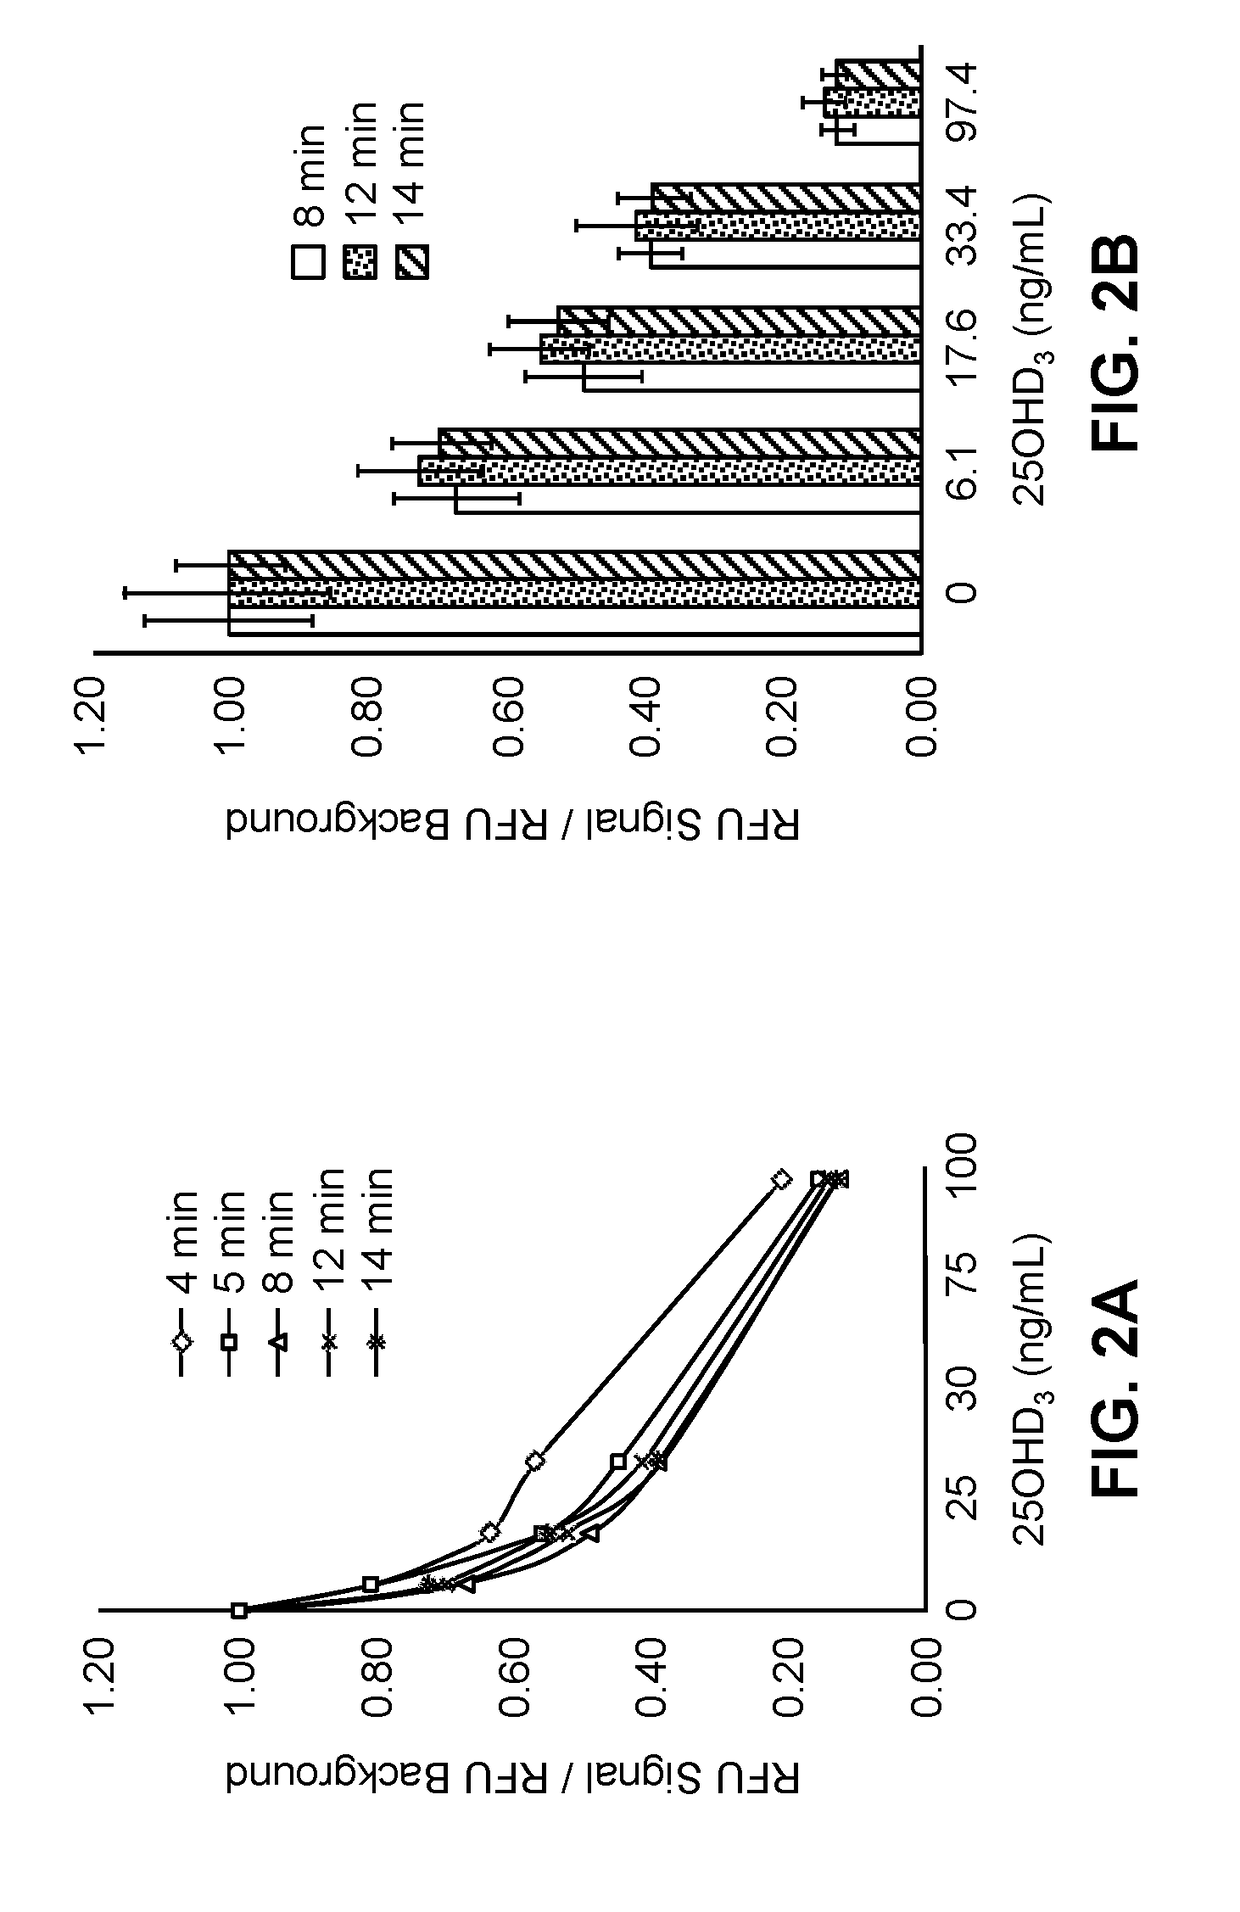 Processing reagent and use thereof in assays for detection of analytes associated with a binding protein